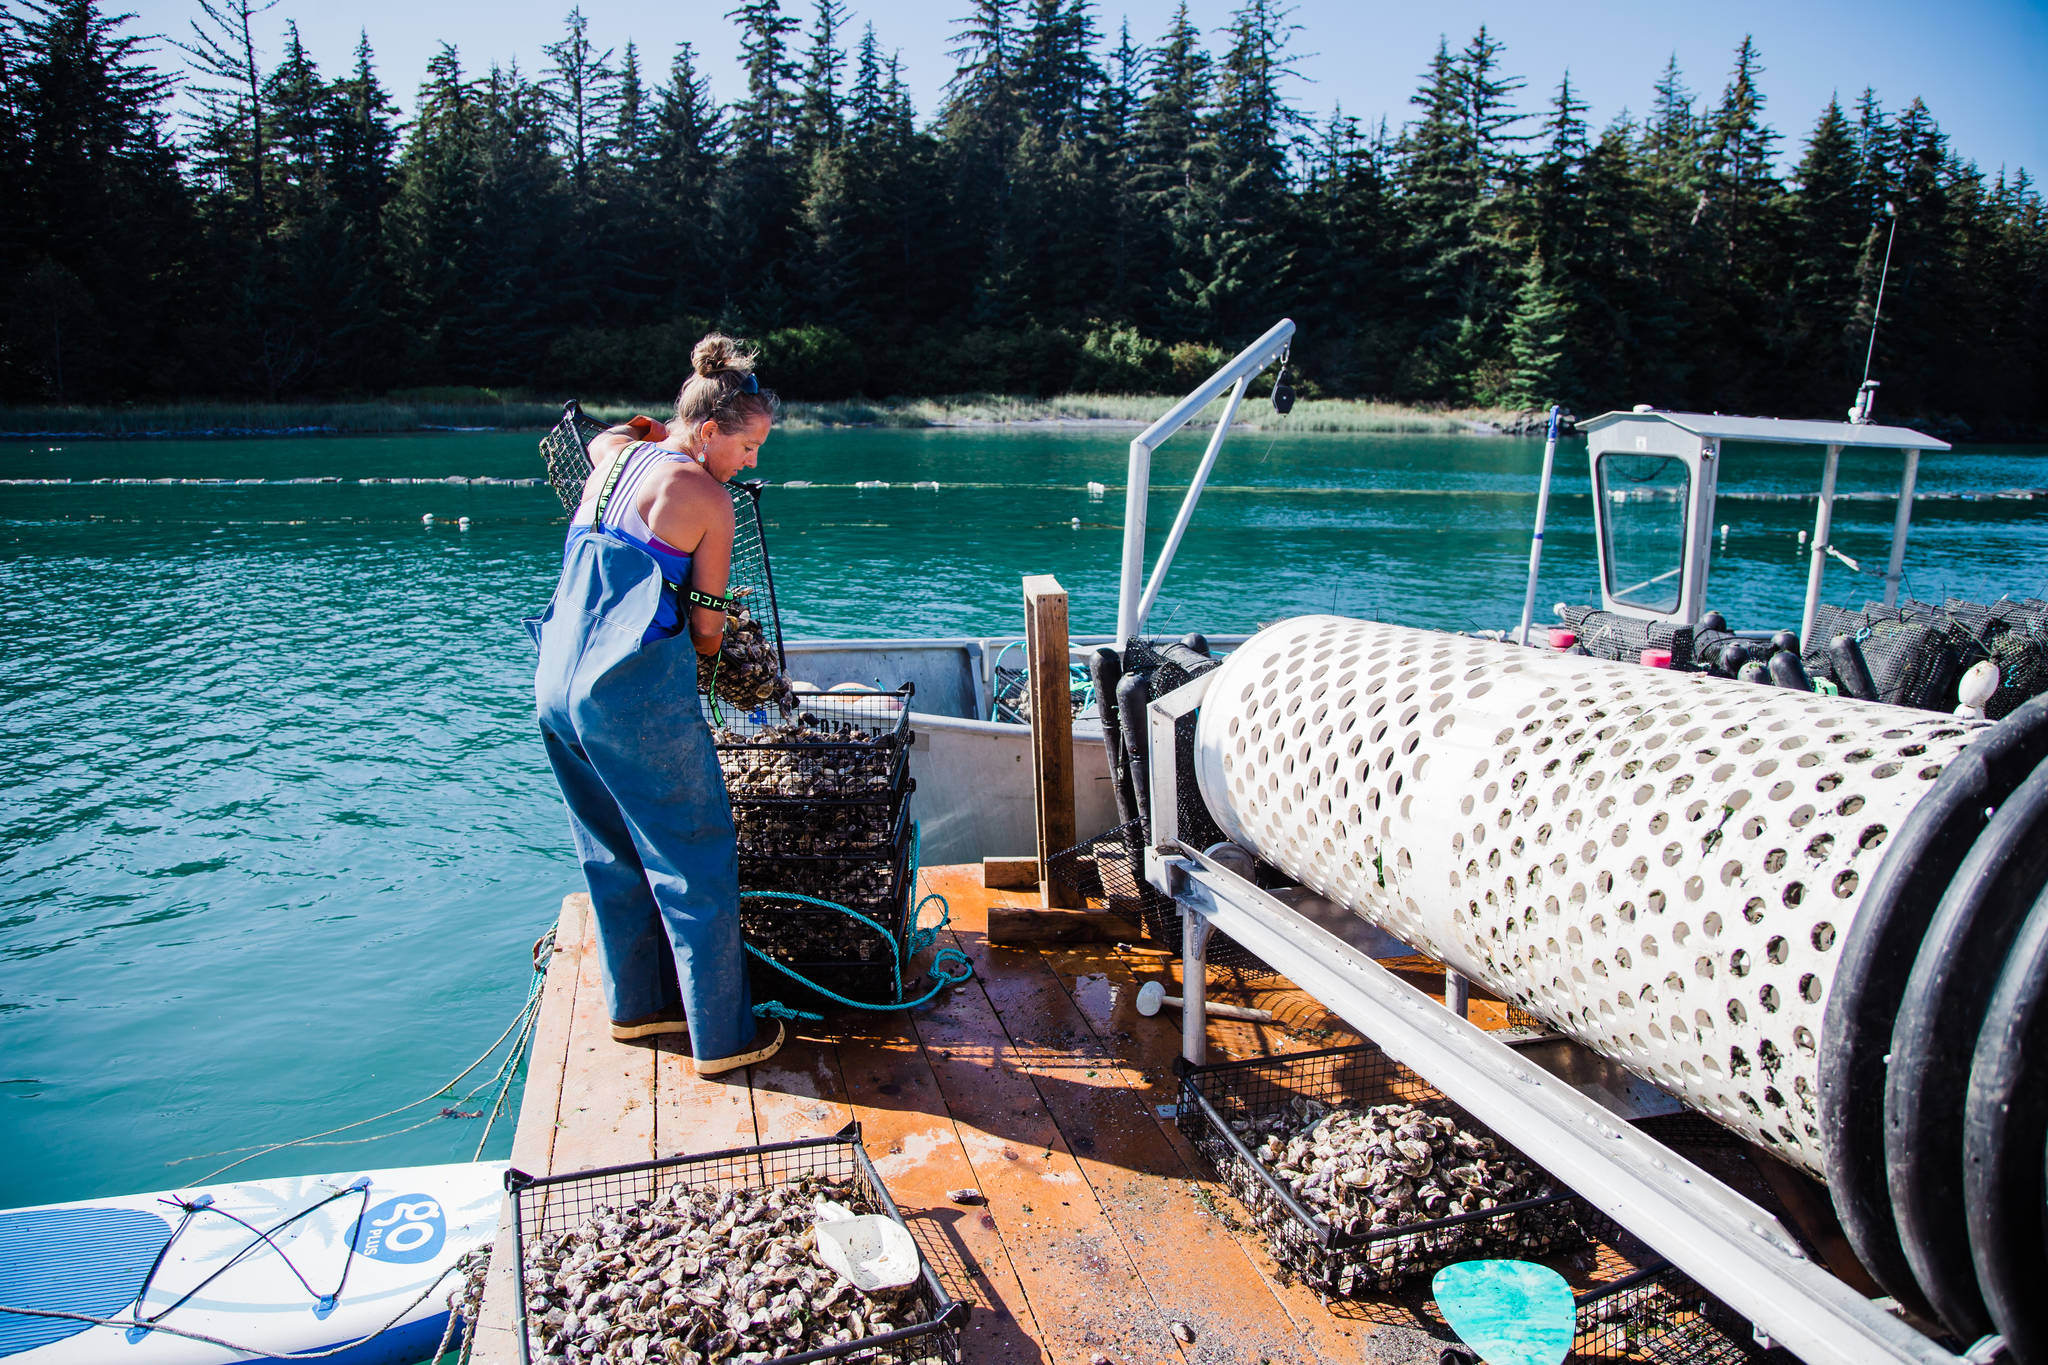 Meta Mesdag, one of the owners of the Salty Lady Seafood Company located at Bridget Point, empties oysters into a sorting machine in this 2019. (Courtesy Photo / Meta Mesdag)